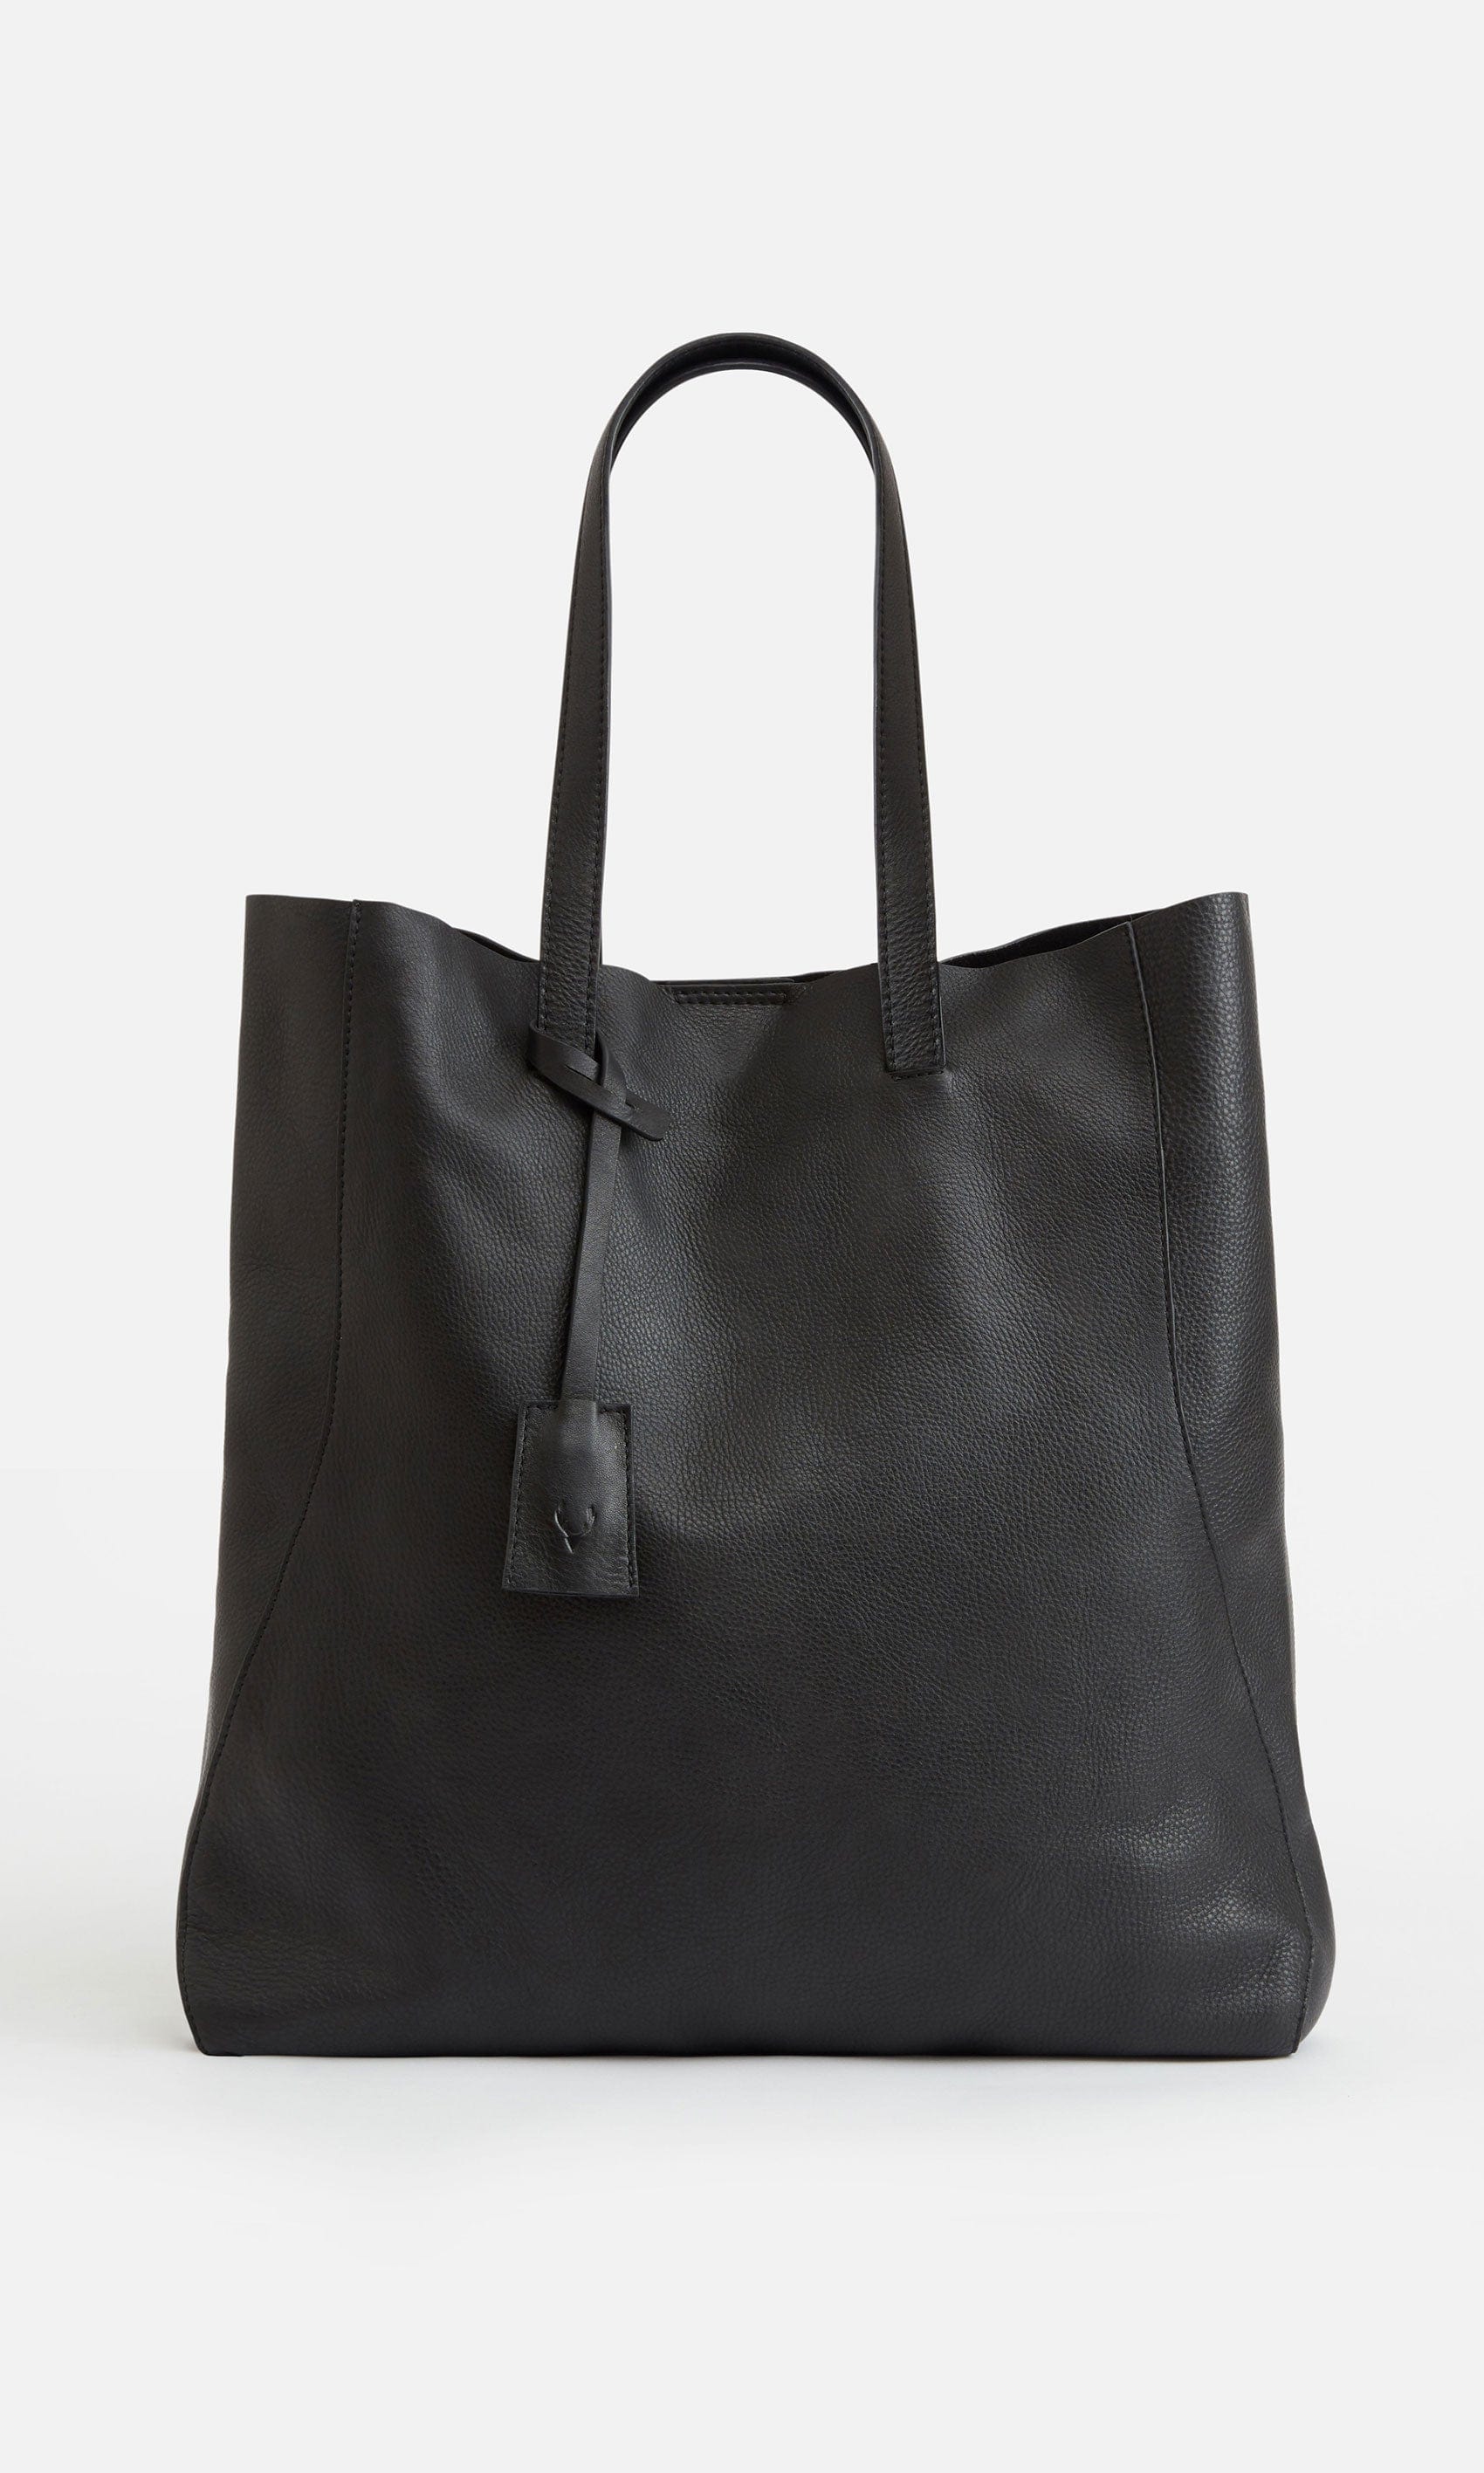 View Antler Brompton Leather Tote In Black Size 44 x 43 x 10 cm information